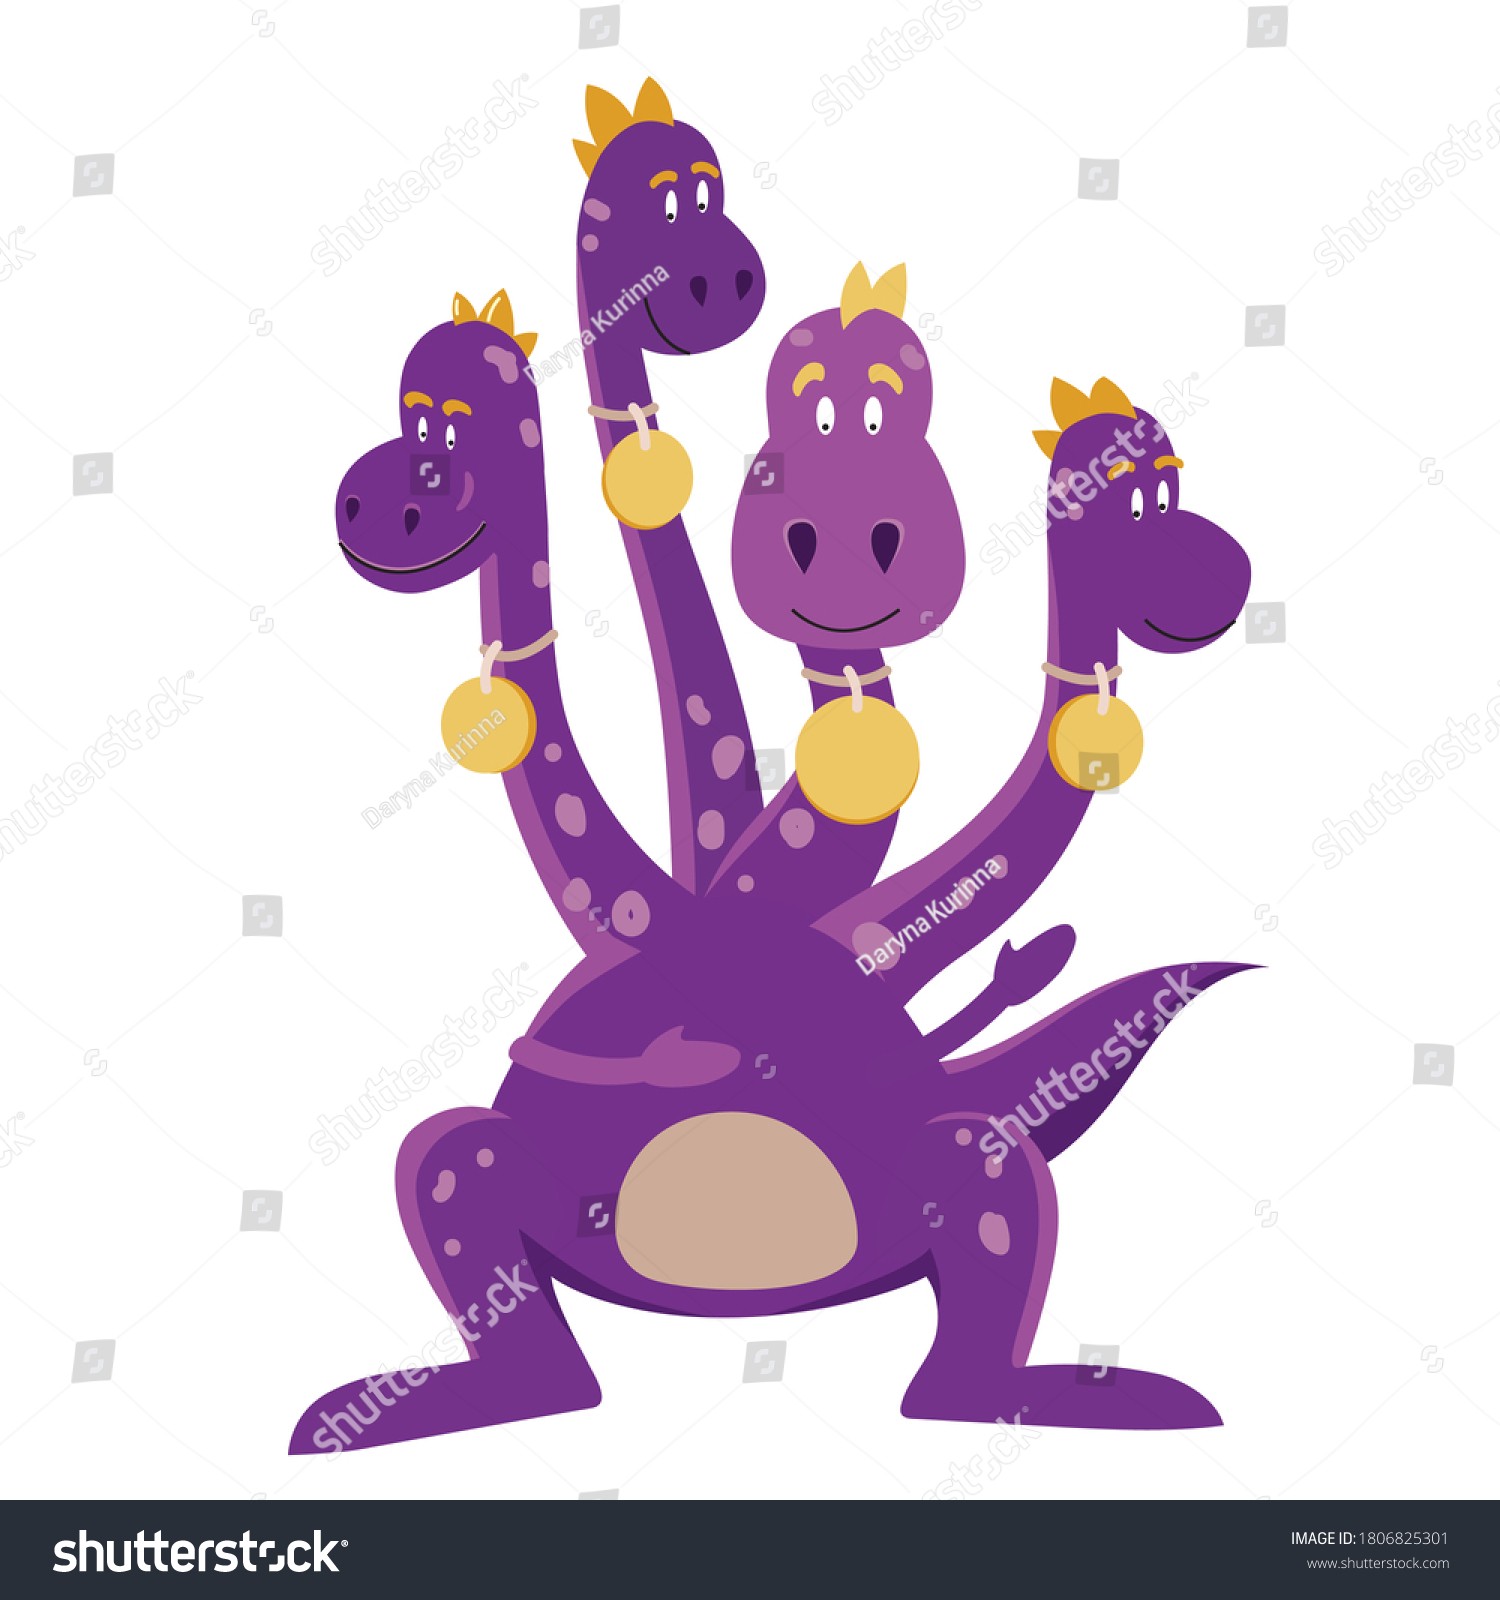 stock-vector-cartoon-dragon-with-four-heads-heads-dino-vector-illustration-of-character-cute-and-funny-1806825301.jpg